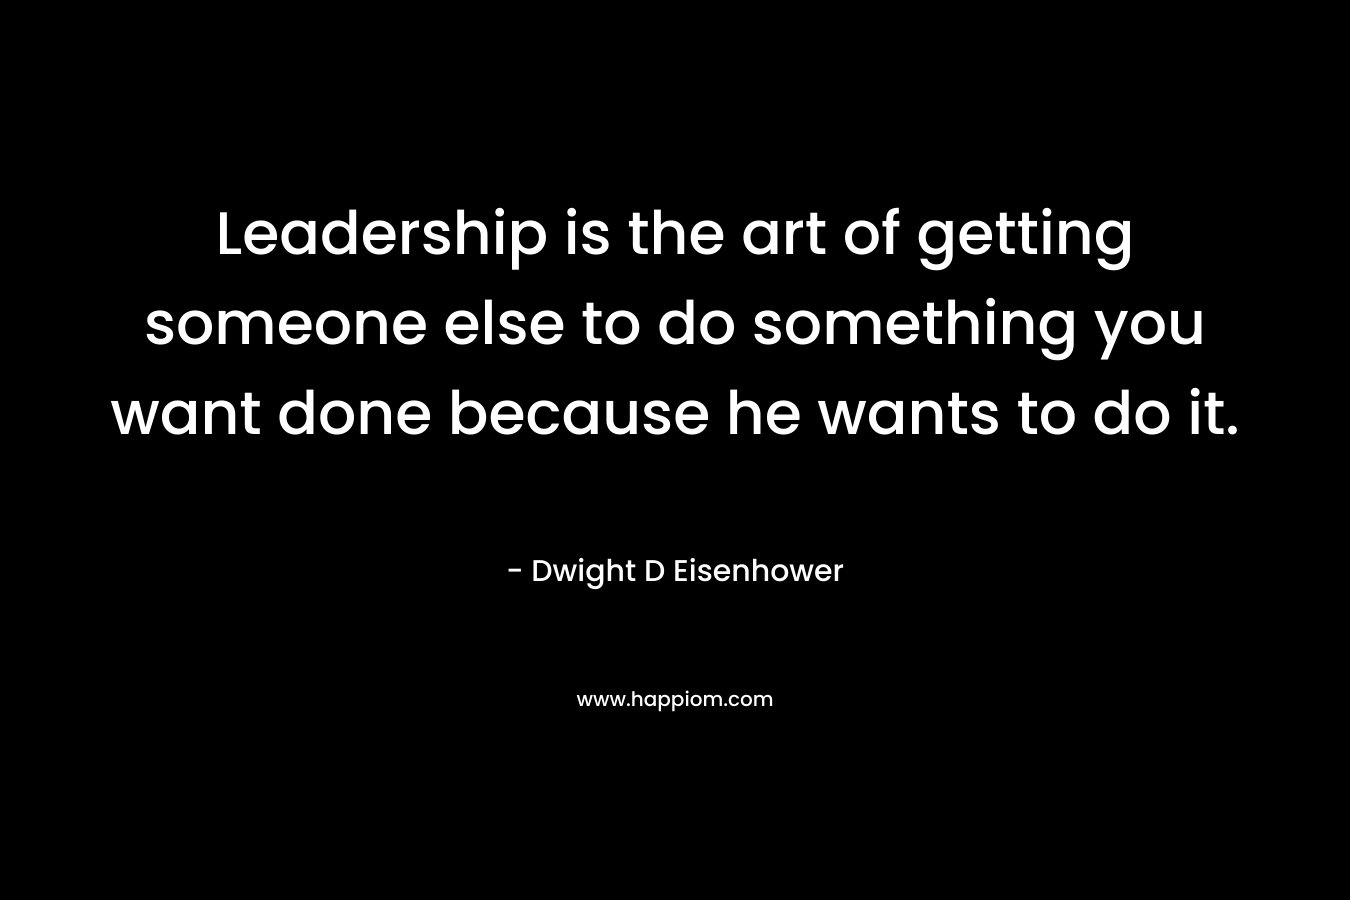 Leadership is the art of getting someone else to do something you want done because he wants to do it. – Dwight D Eisenhower